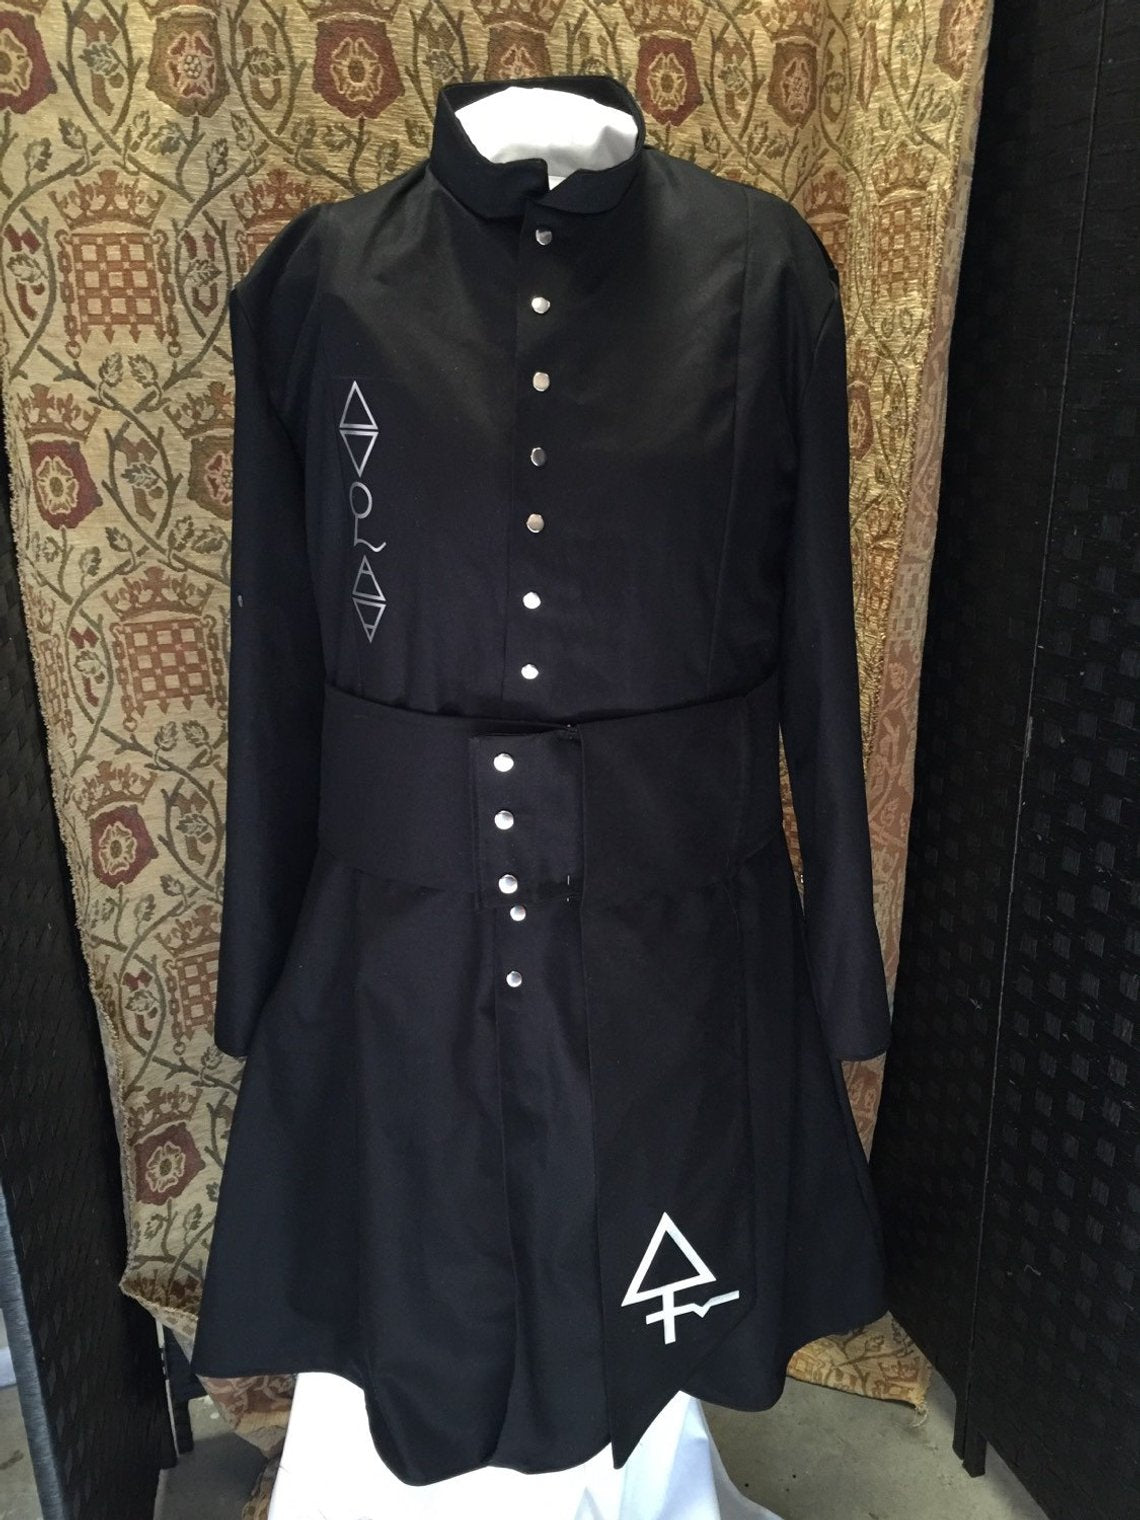 Ghost inspired coat including sash